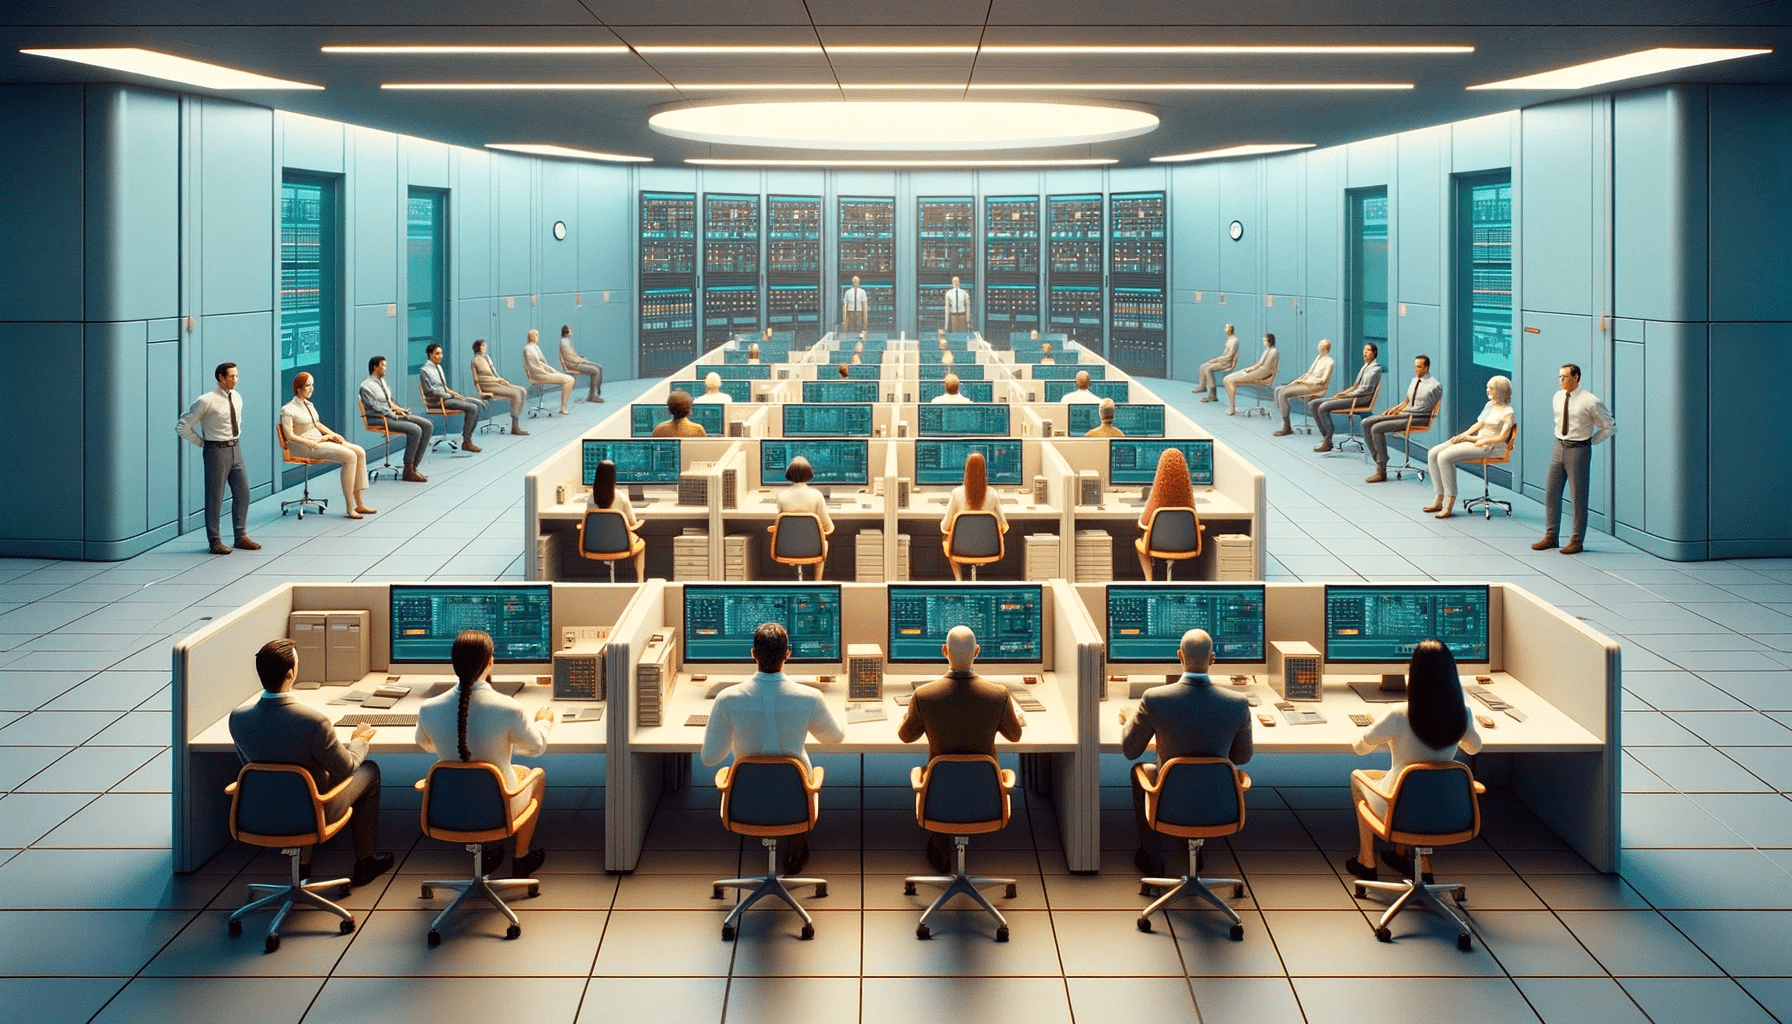 The image features a modern IT security command center, styled in the distinct Wes Anderson aesthetic. In the foreground, a diverse group of individuals is positioned frontally, facing the viewer. They are symmetrically arranged, with each person attentively working at their computer stations. The command center is characterized by a pastel color palette, adding a whimsical yet sophisticated touch typical of Anderson's films. In the background, large computer screens display various cybersecurity data. The entire scene is meticulously organized, blending a professional atmosphere with artistic flair.